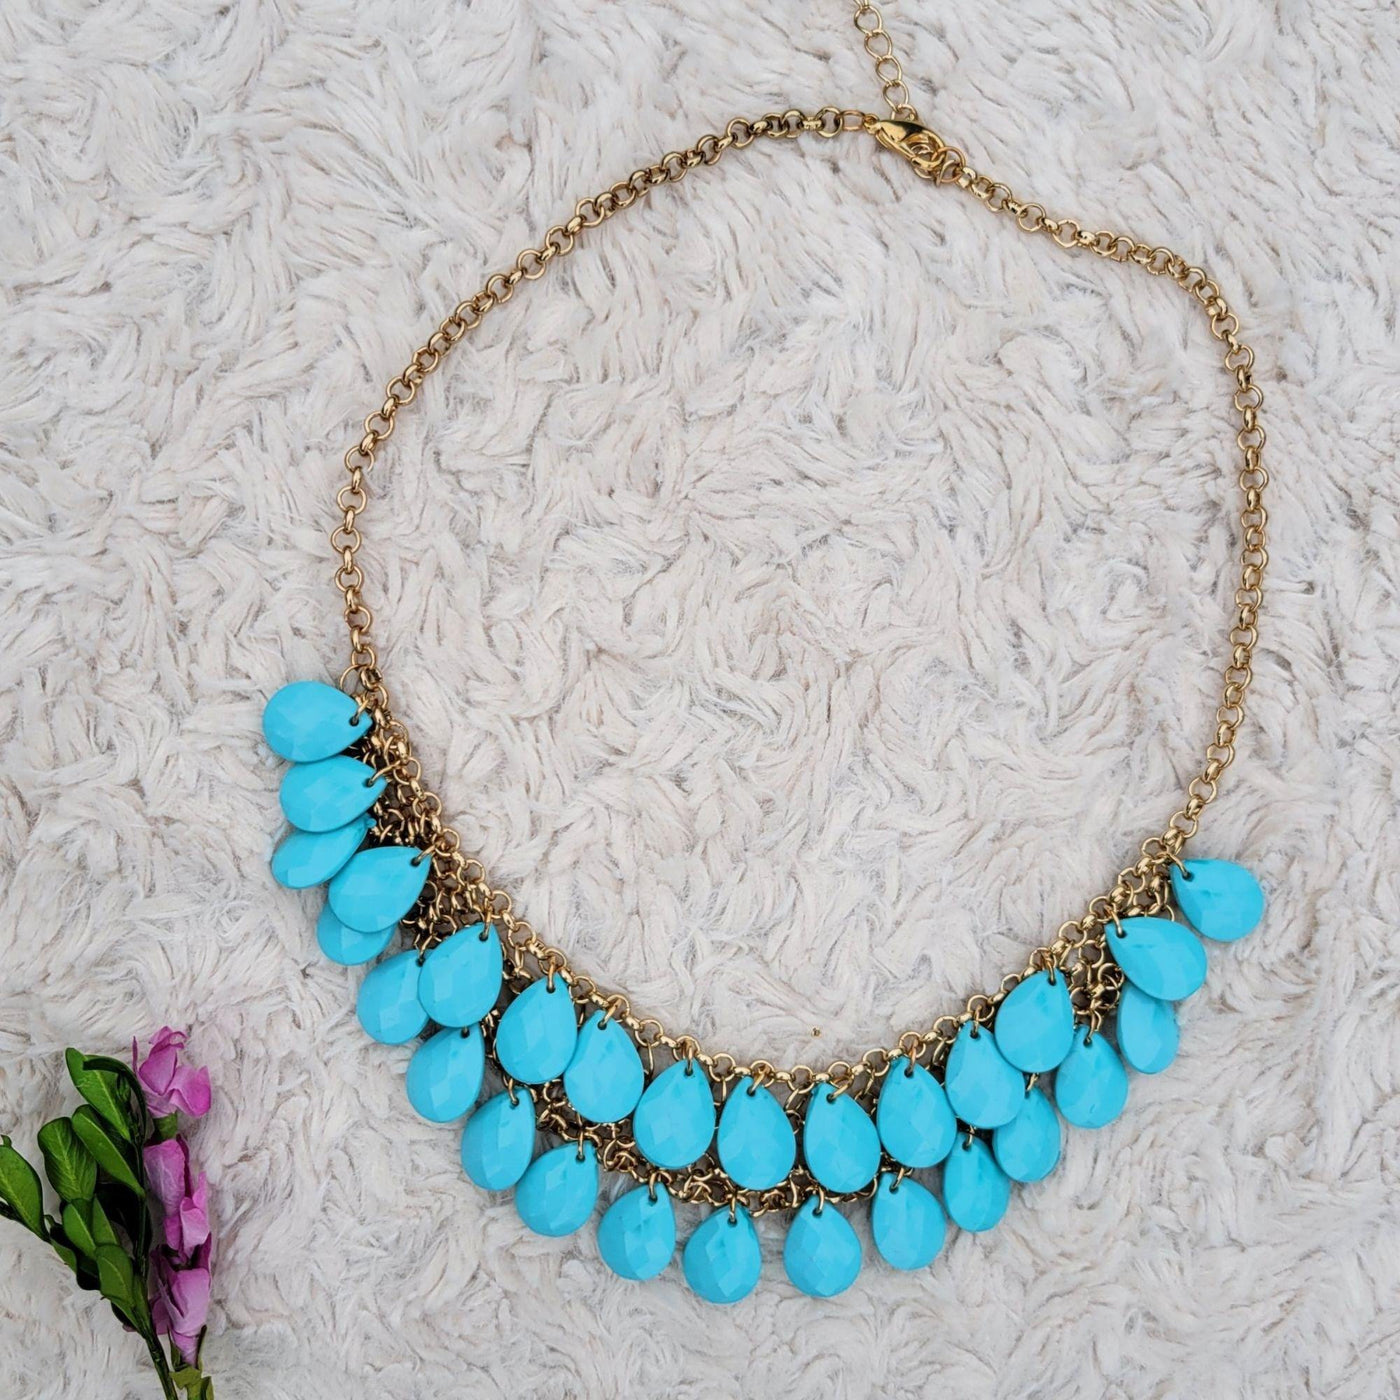 Double Layered Blue Tear Drop Beaded Gold Colored Statement Necklace 22" - Accessories - dalia + jade 